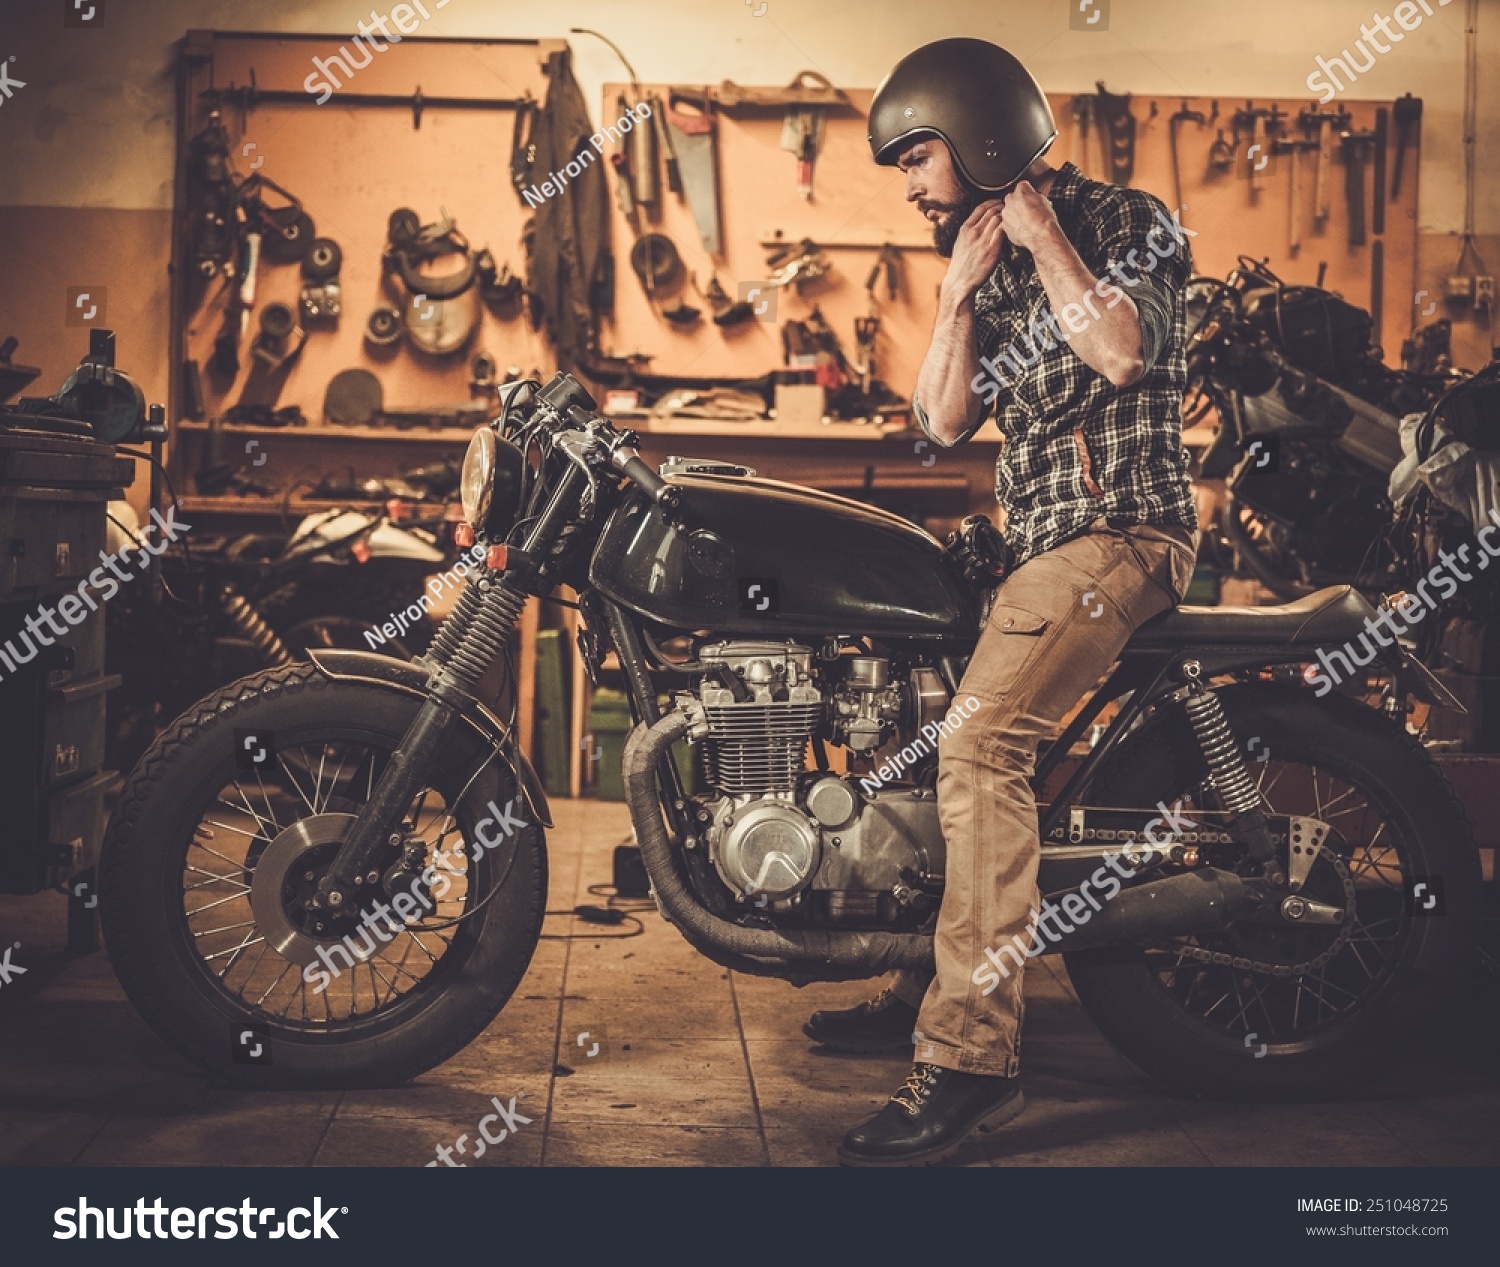 Rider His Vintage Style Caferacer Motorcycle Stock Photo Edit Now 251048725